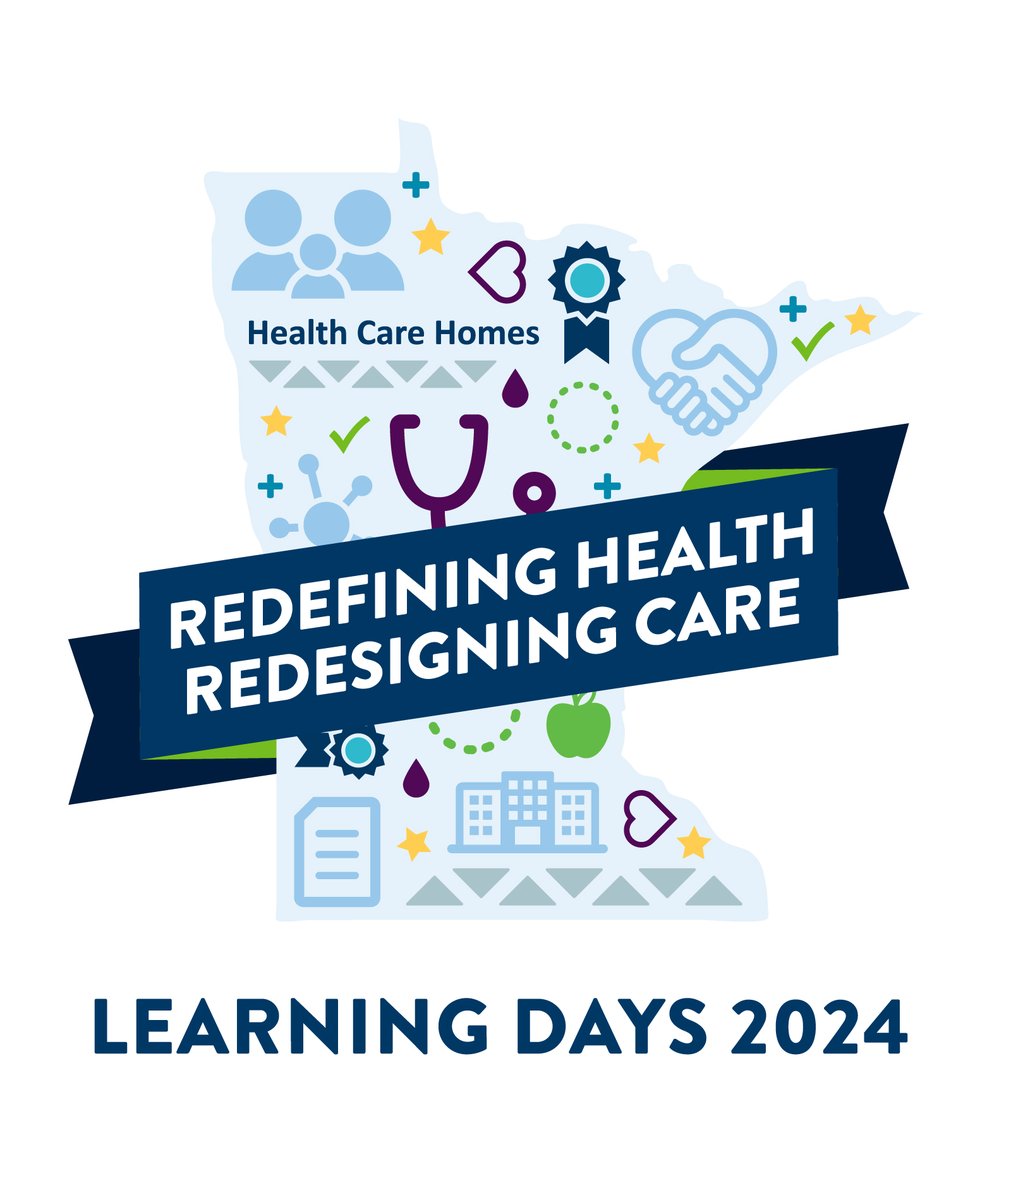 Join primary care colleagues at #MNHealthCareHomes Learning Days May 16 in St. Cloud! Discover how to transform mental health care through normalization, education, prevention, and improved access to comprehensive care. bit.ly/4auwlqq